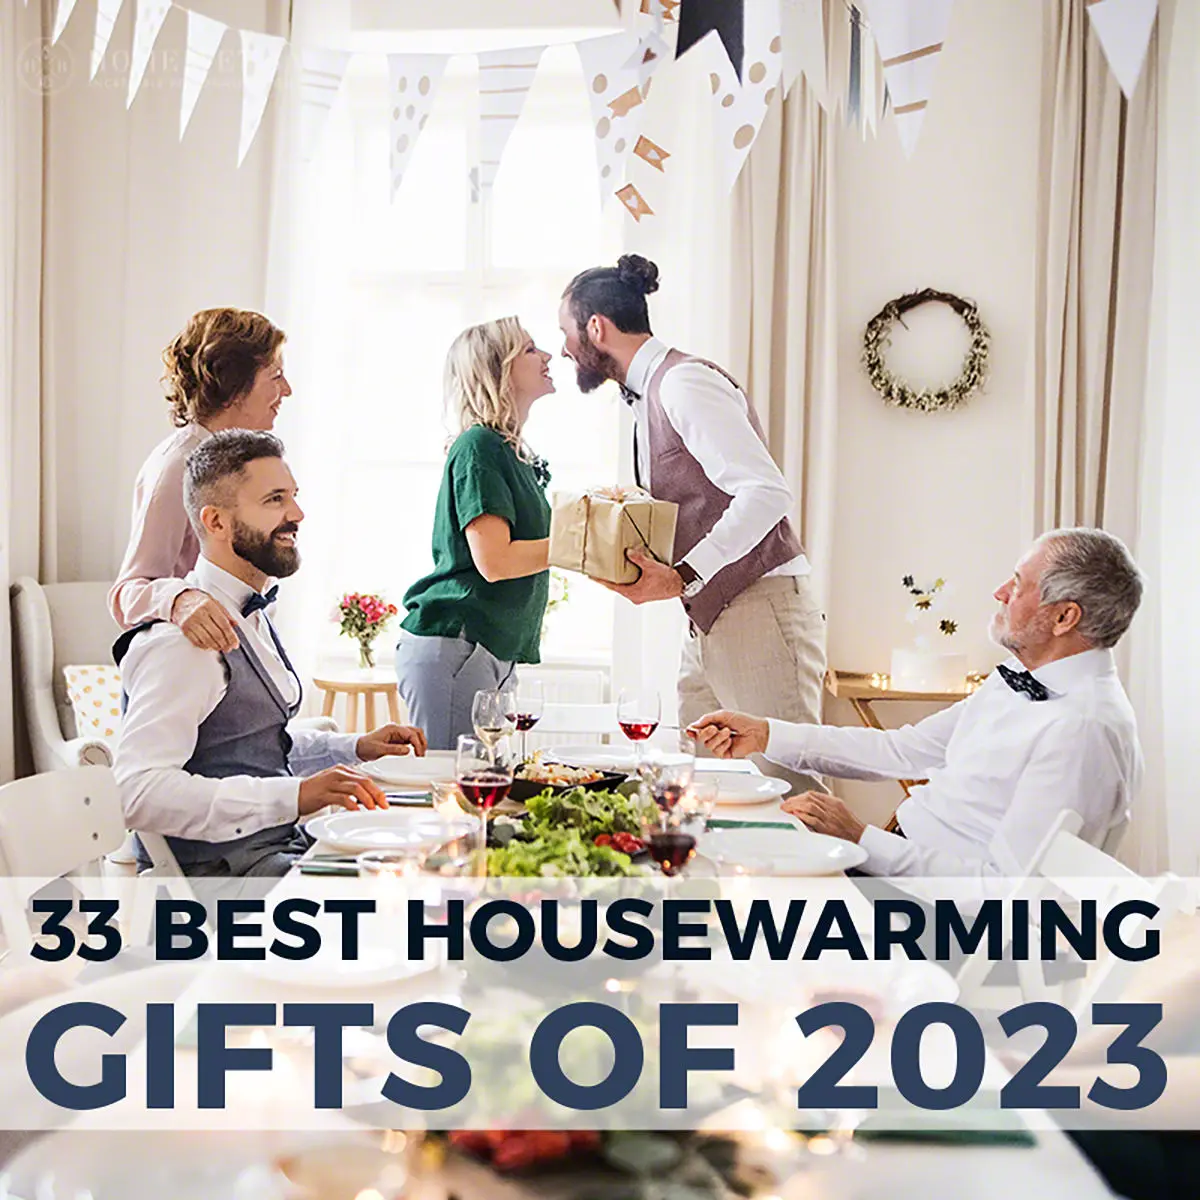 15 Of The BEST Housewarming Gifts for a Warming Planet  Going Zero Waste